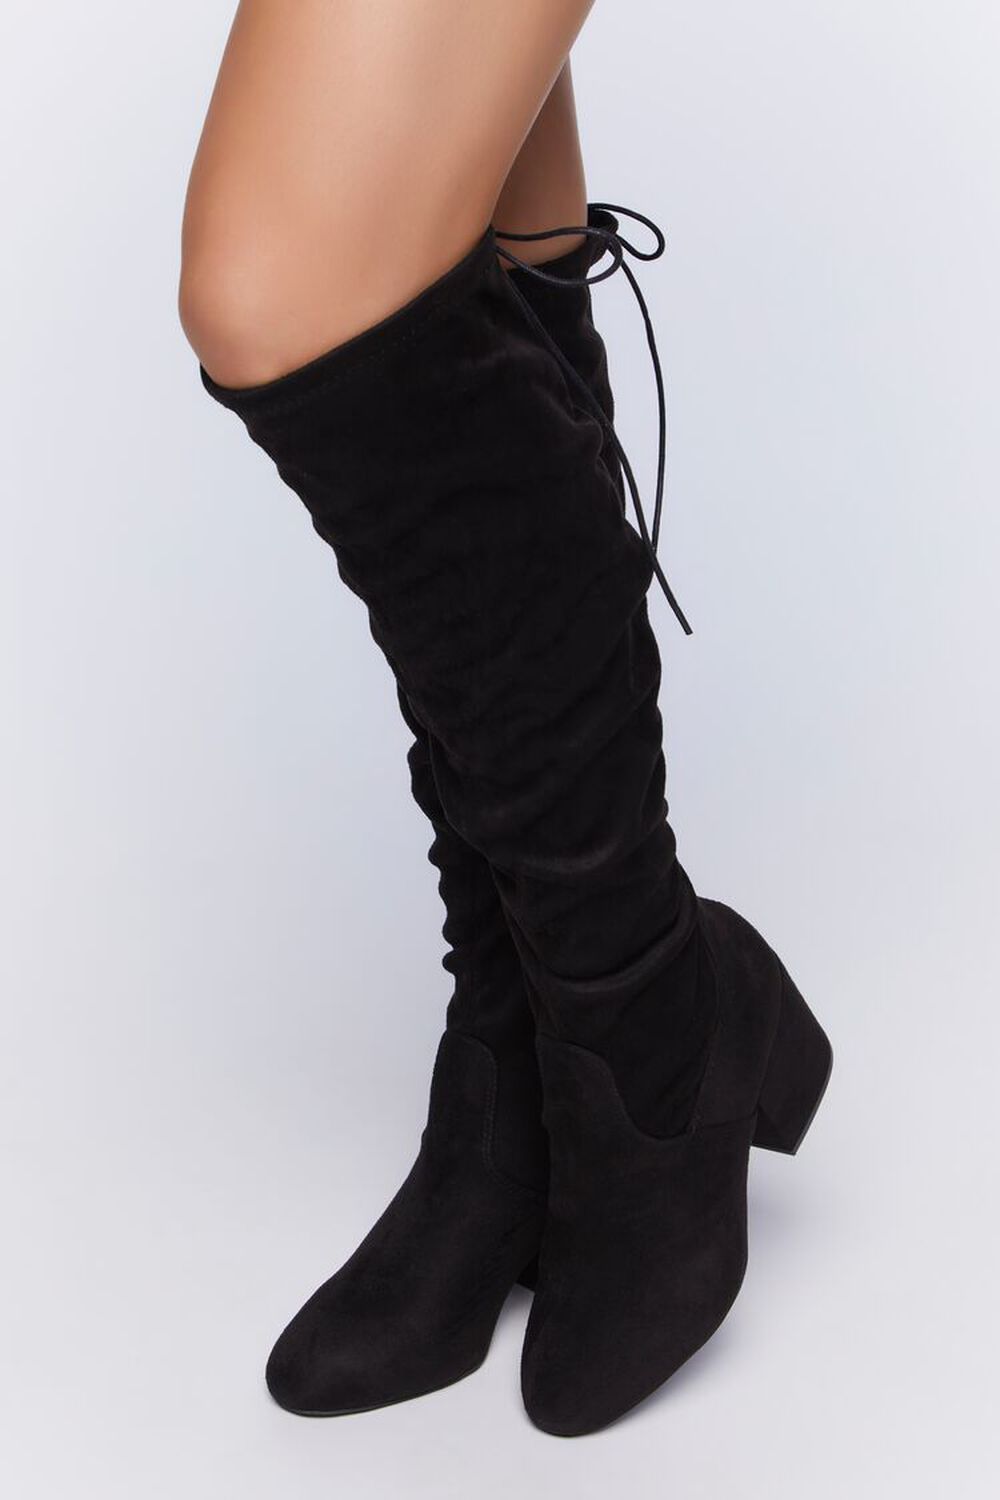 BLACK Lace-Up Over-the-Knee Boots, image 1